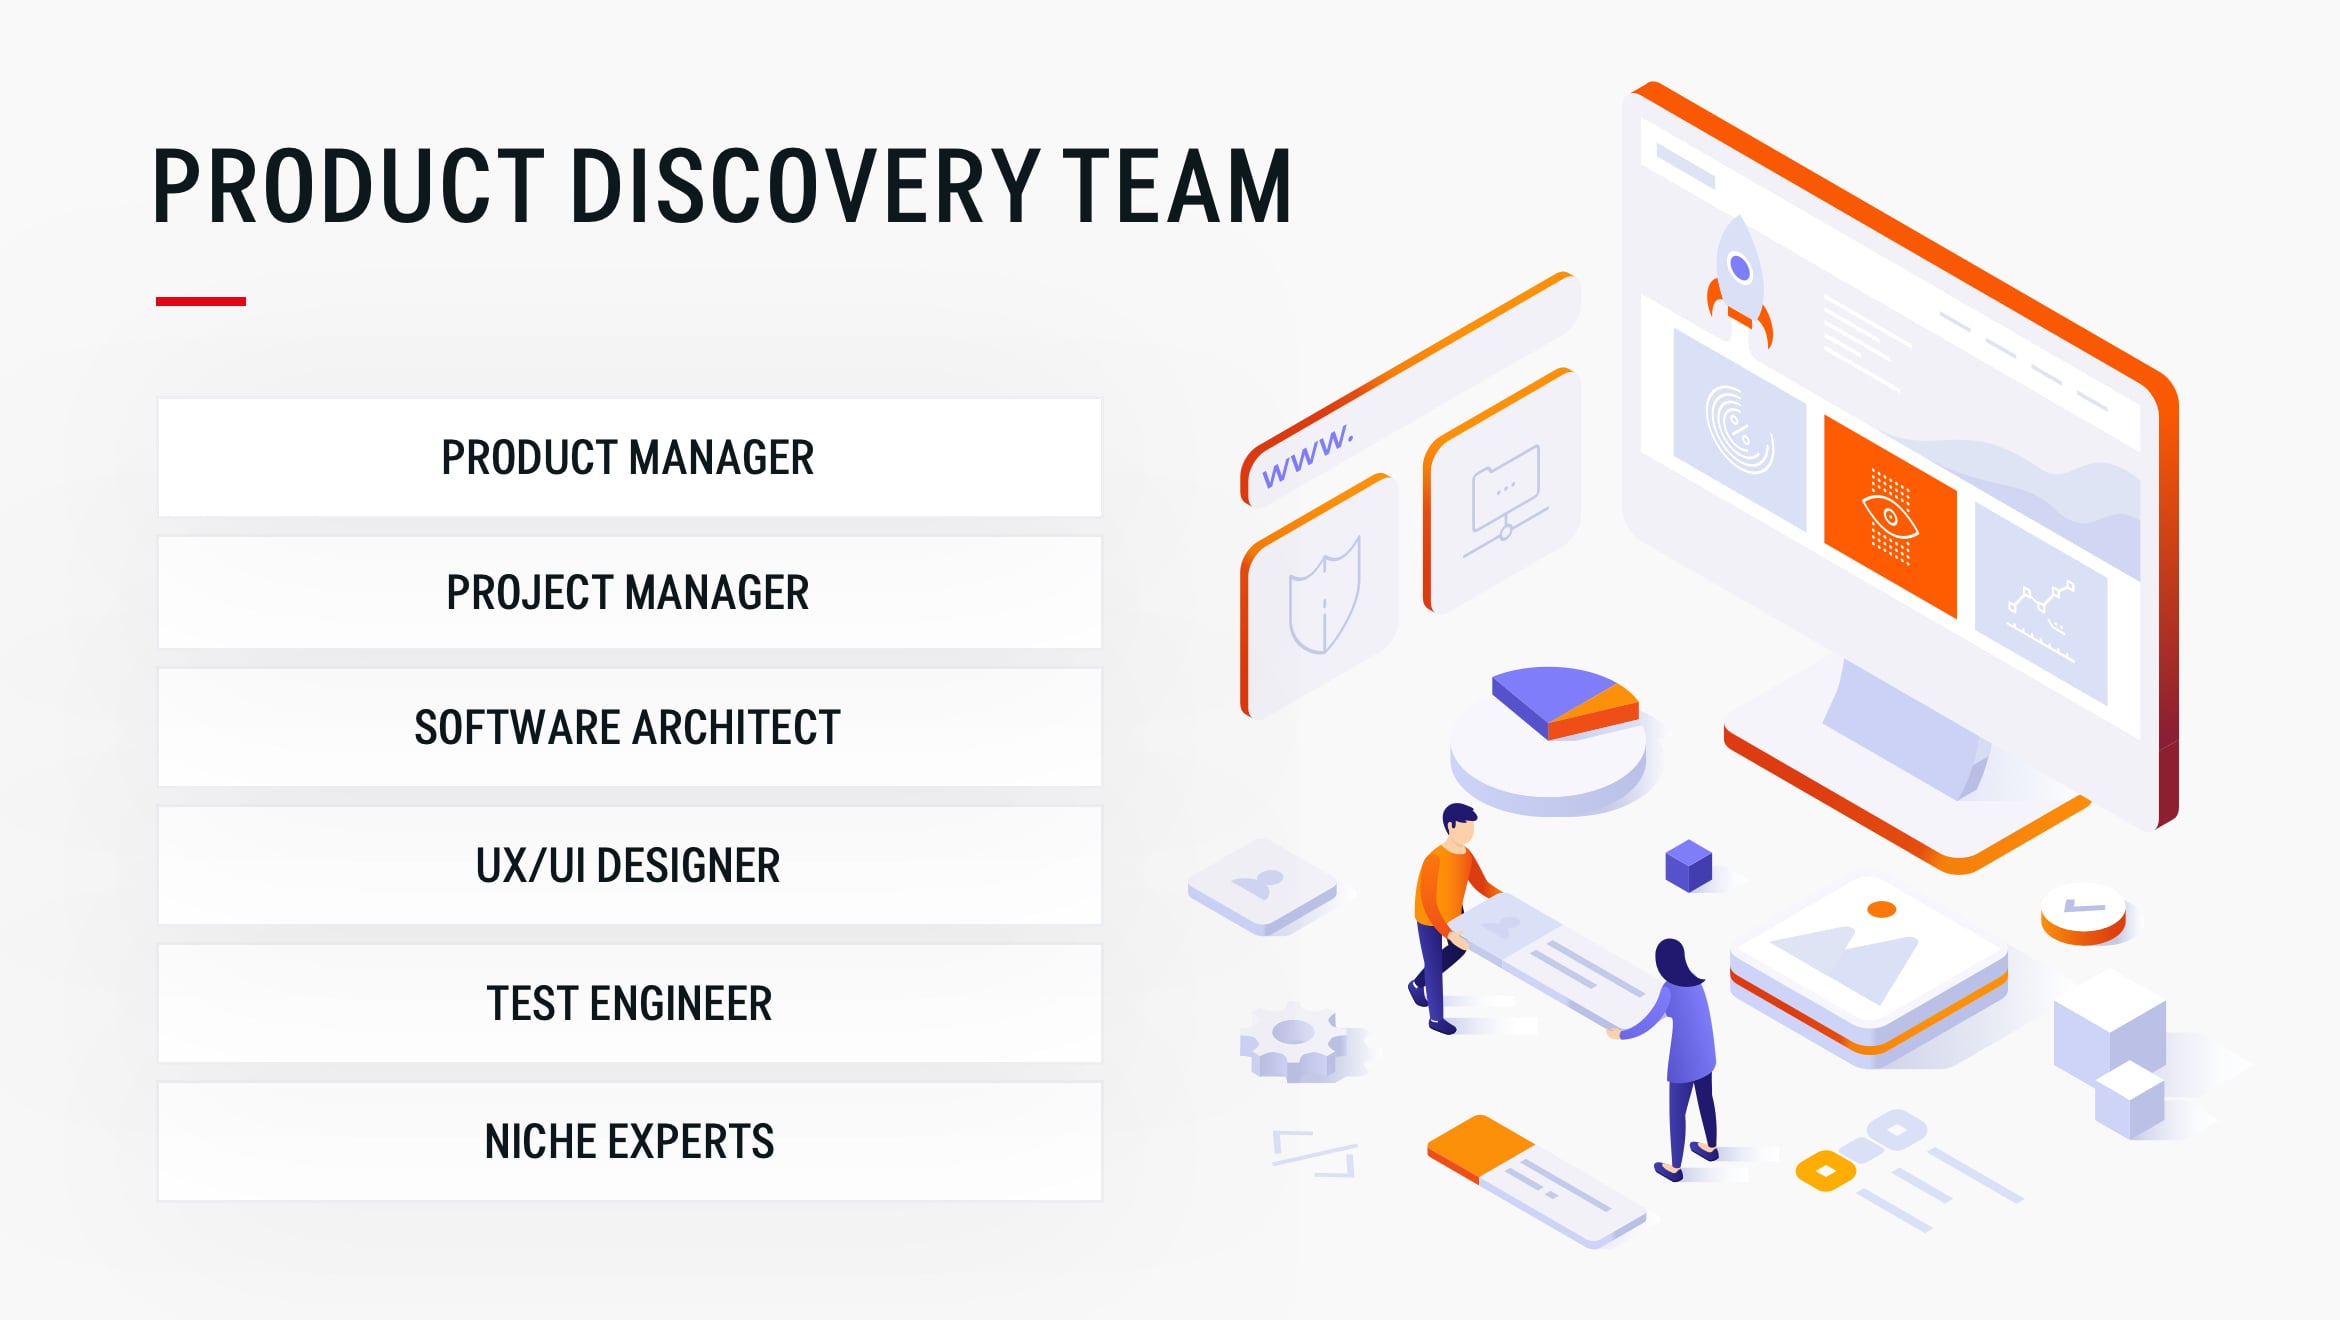 Product discovery team